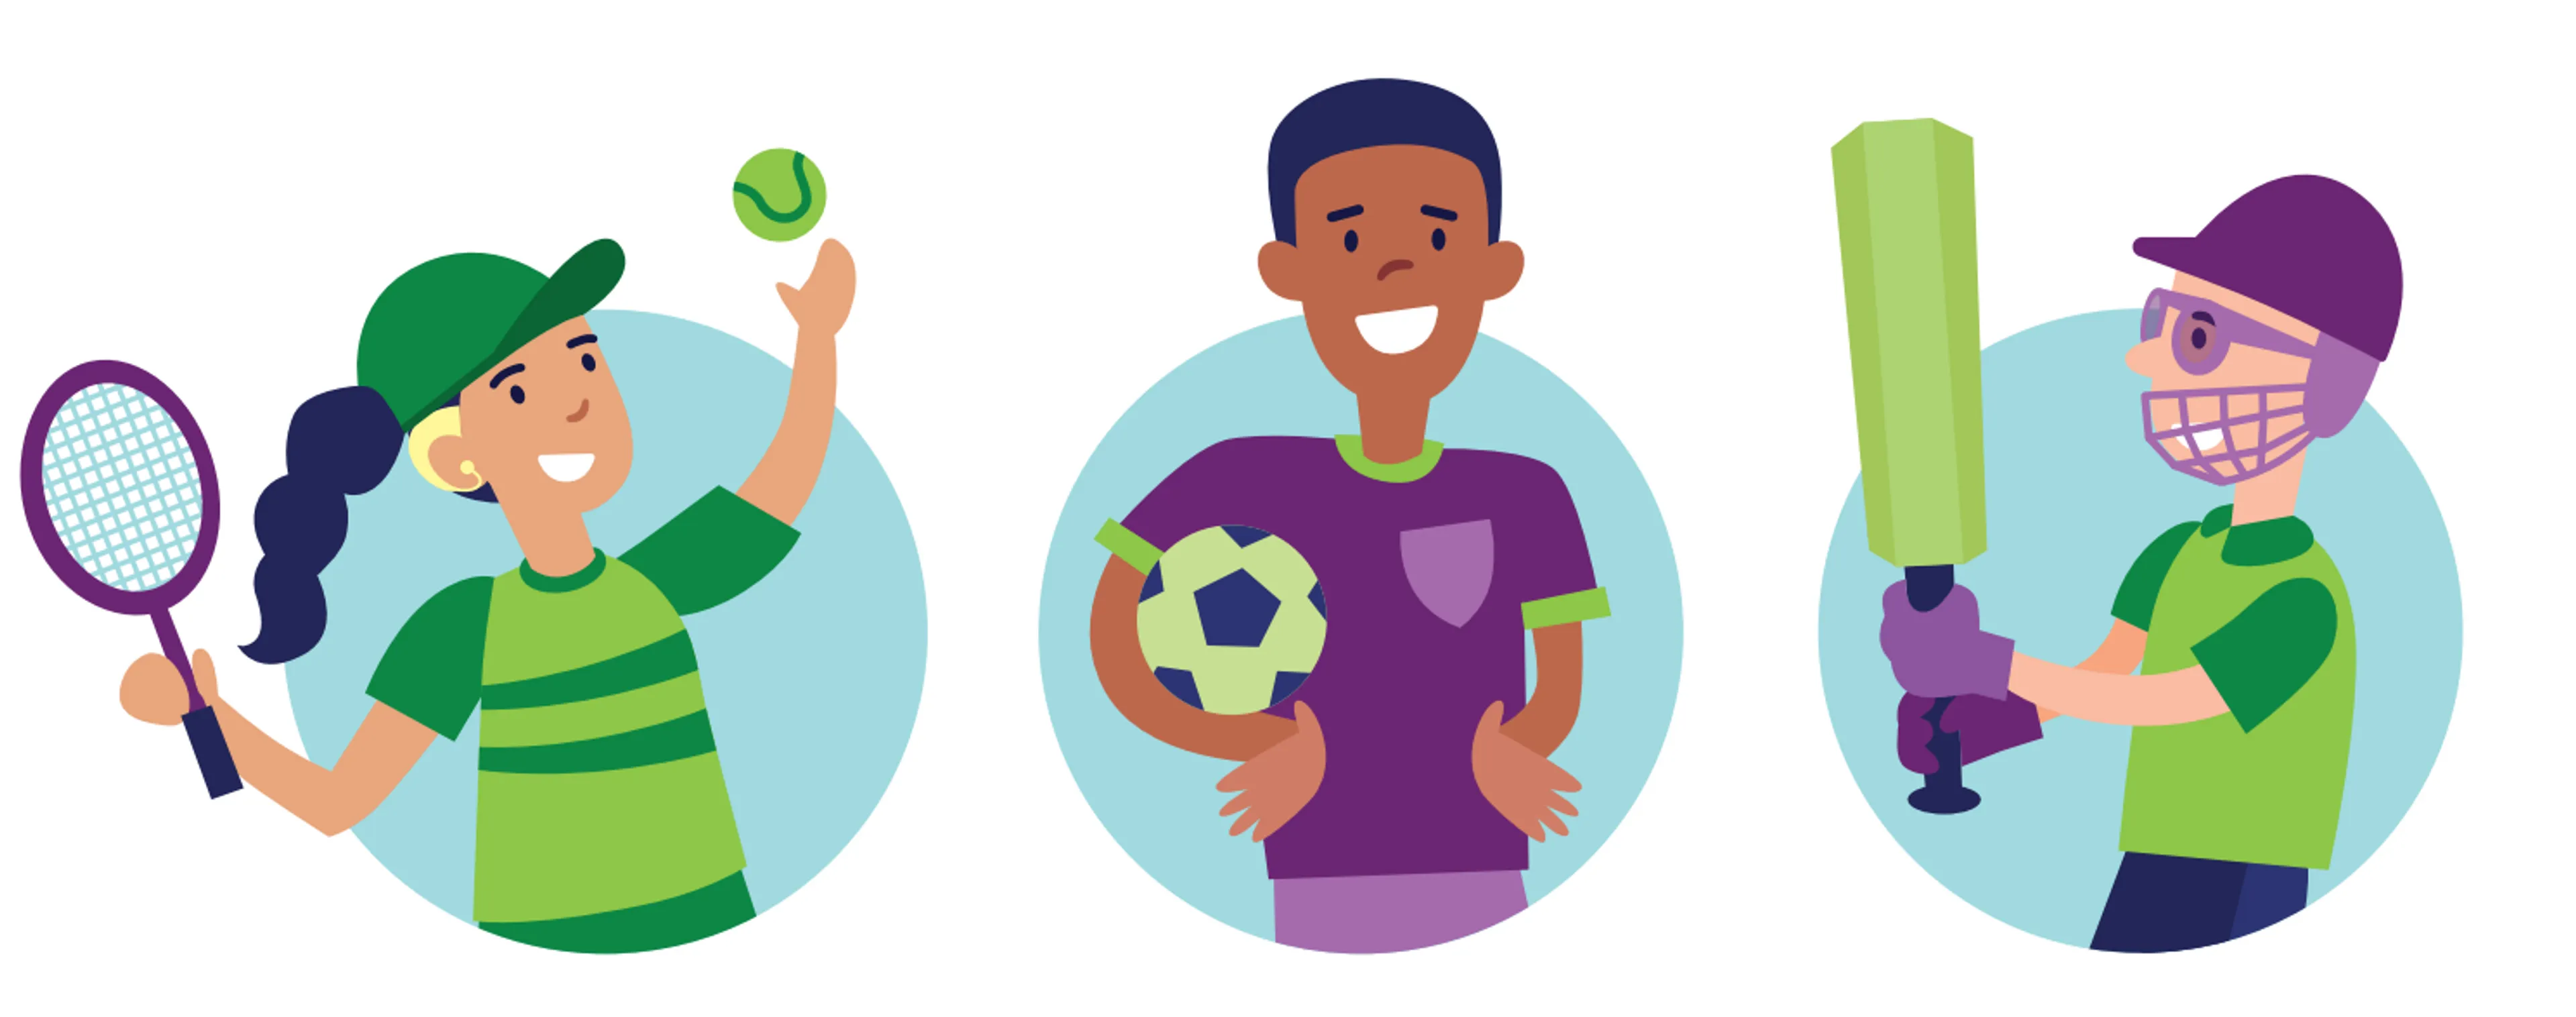 Illustration of three pupils participating in sport, one playing tennis, one holding a soccer ball, one holding a cricket bat.